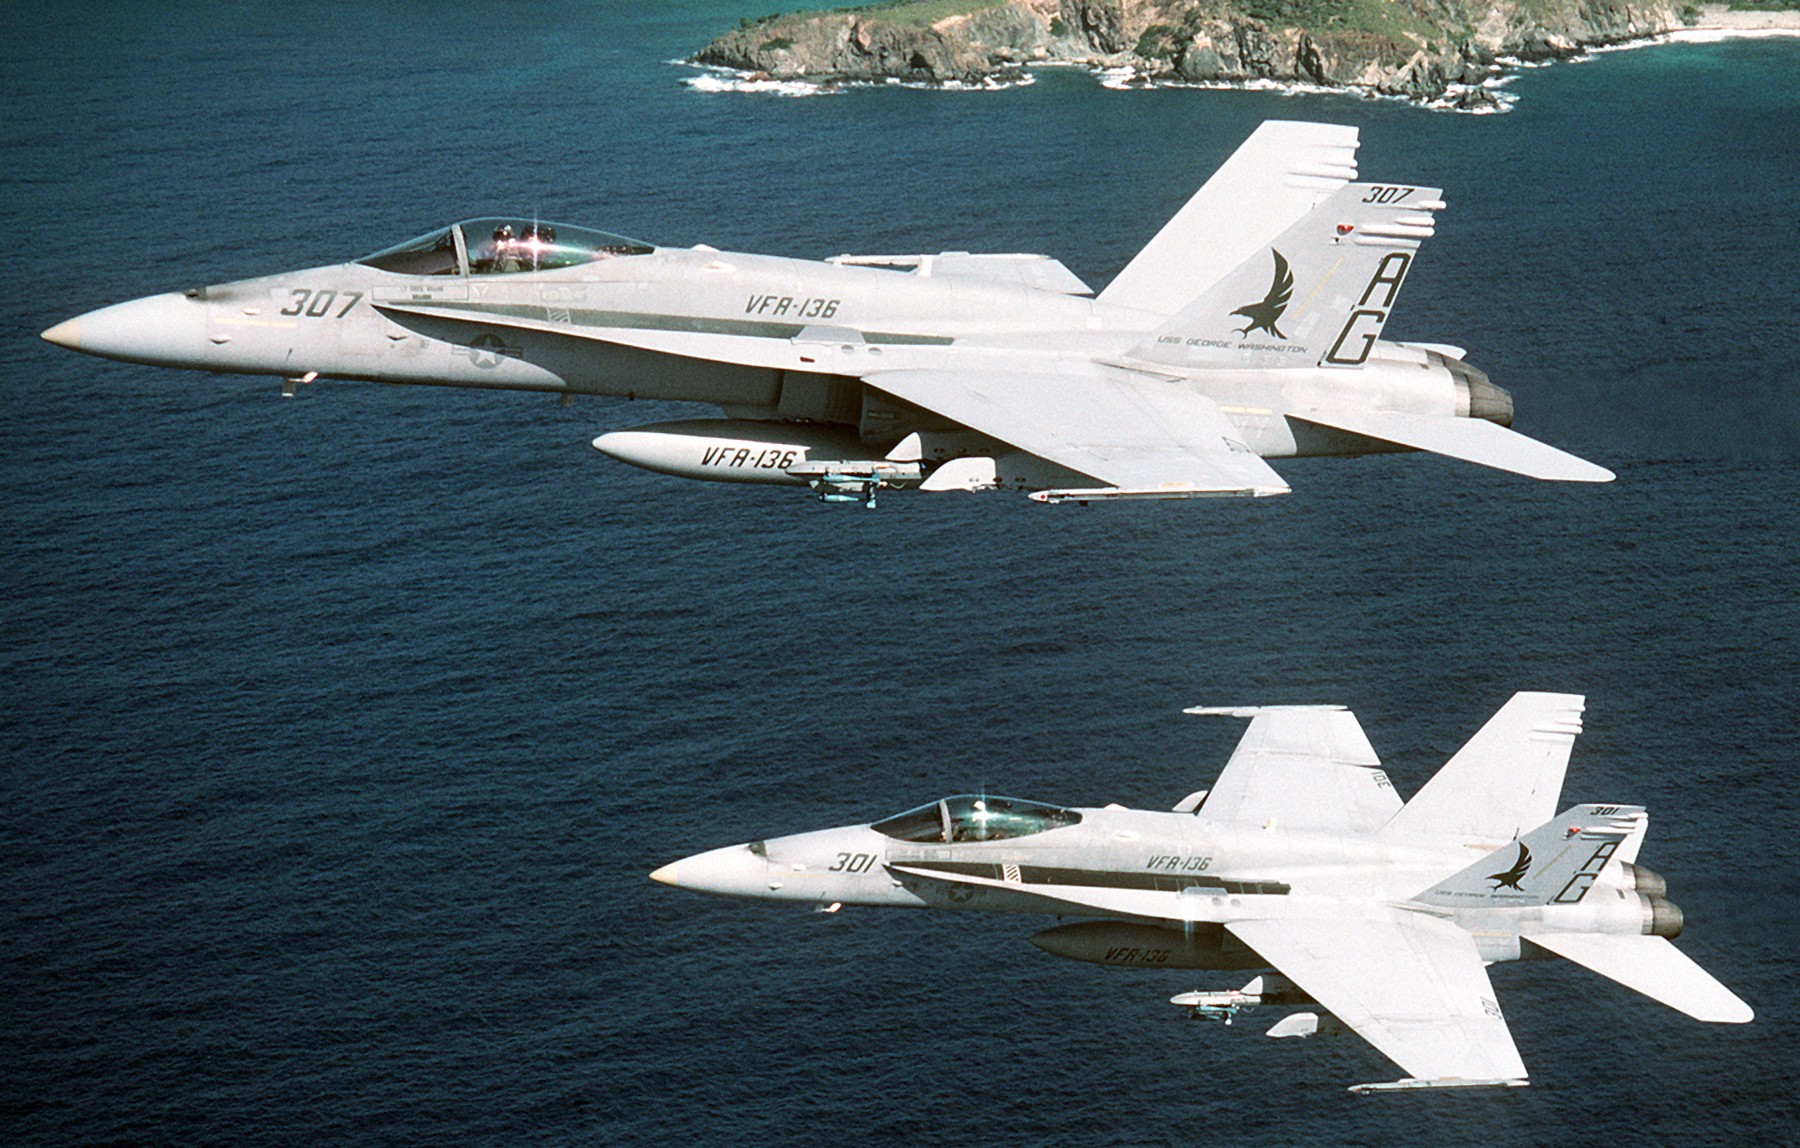 vfa-136 knighthawks strike fighter squadron f/a-18c hornet 1992 72 cvw-7 naval station roosevelt roads puerto rico